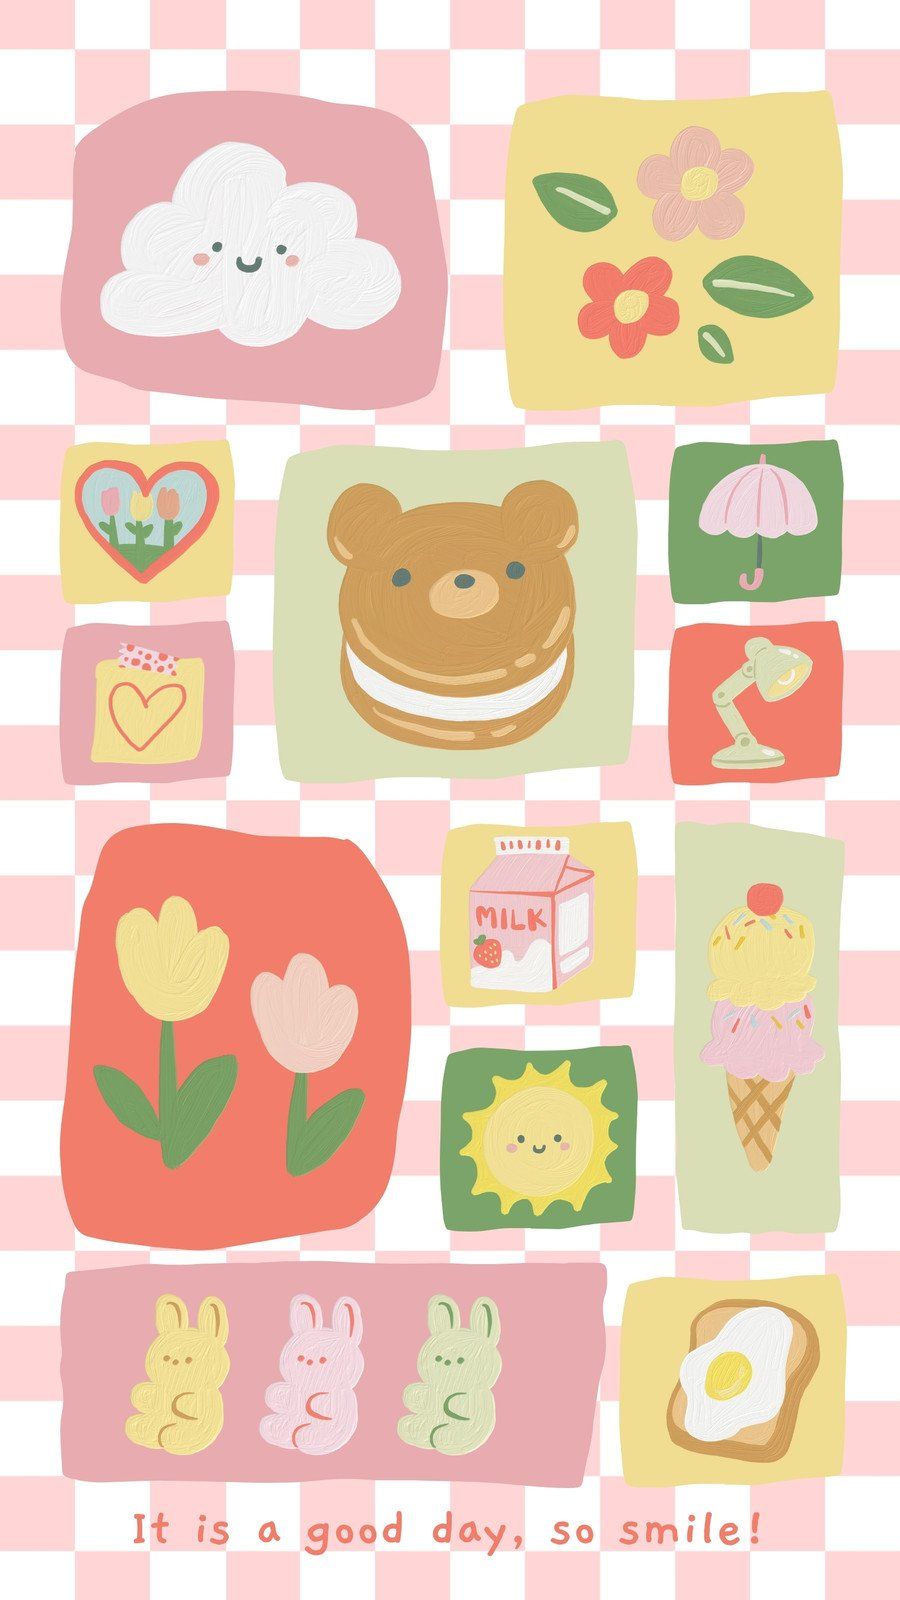 A pastel illustration of food and nature items on a pink and white grid background - Kawaii